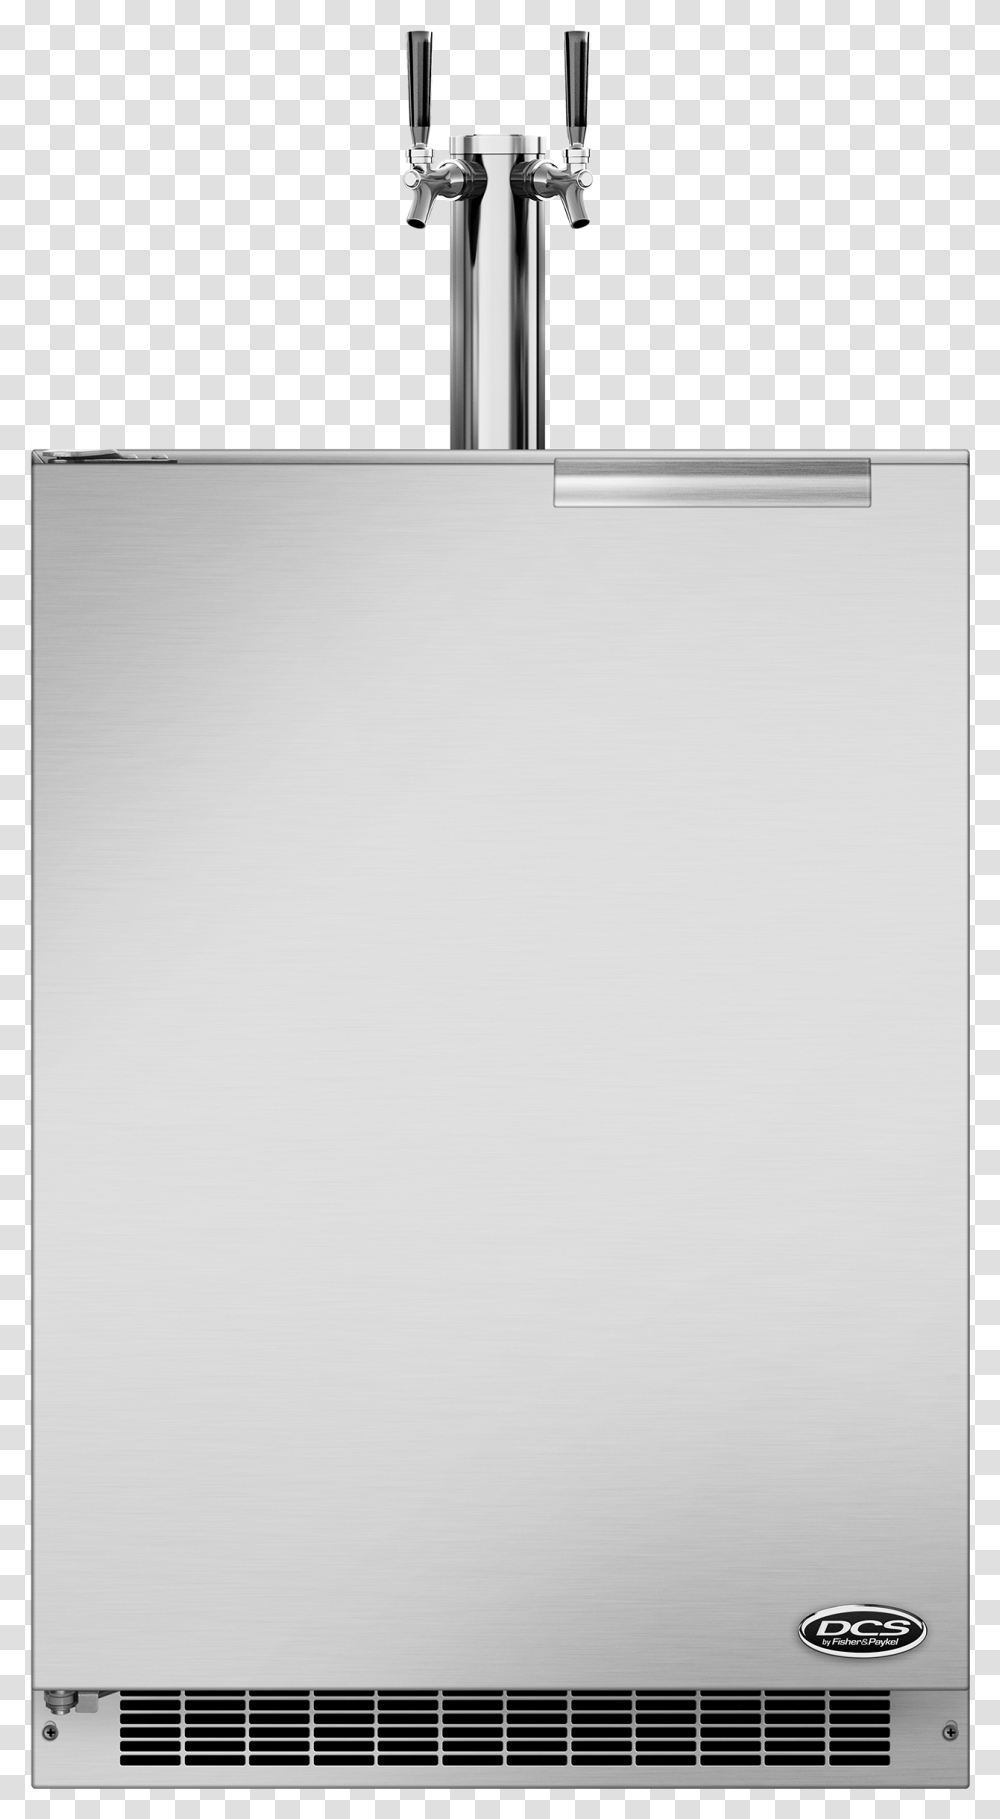 Beer Tap Dcs 24quot Outdoor Beer Dispenser, Appliance, White Board, Dishwasher, Canvas Transparent Png